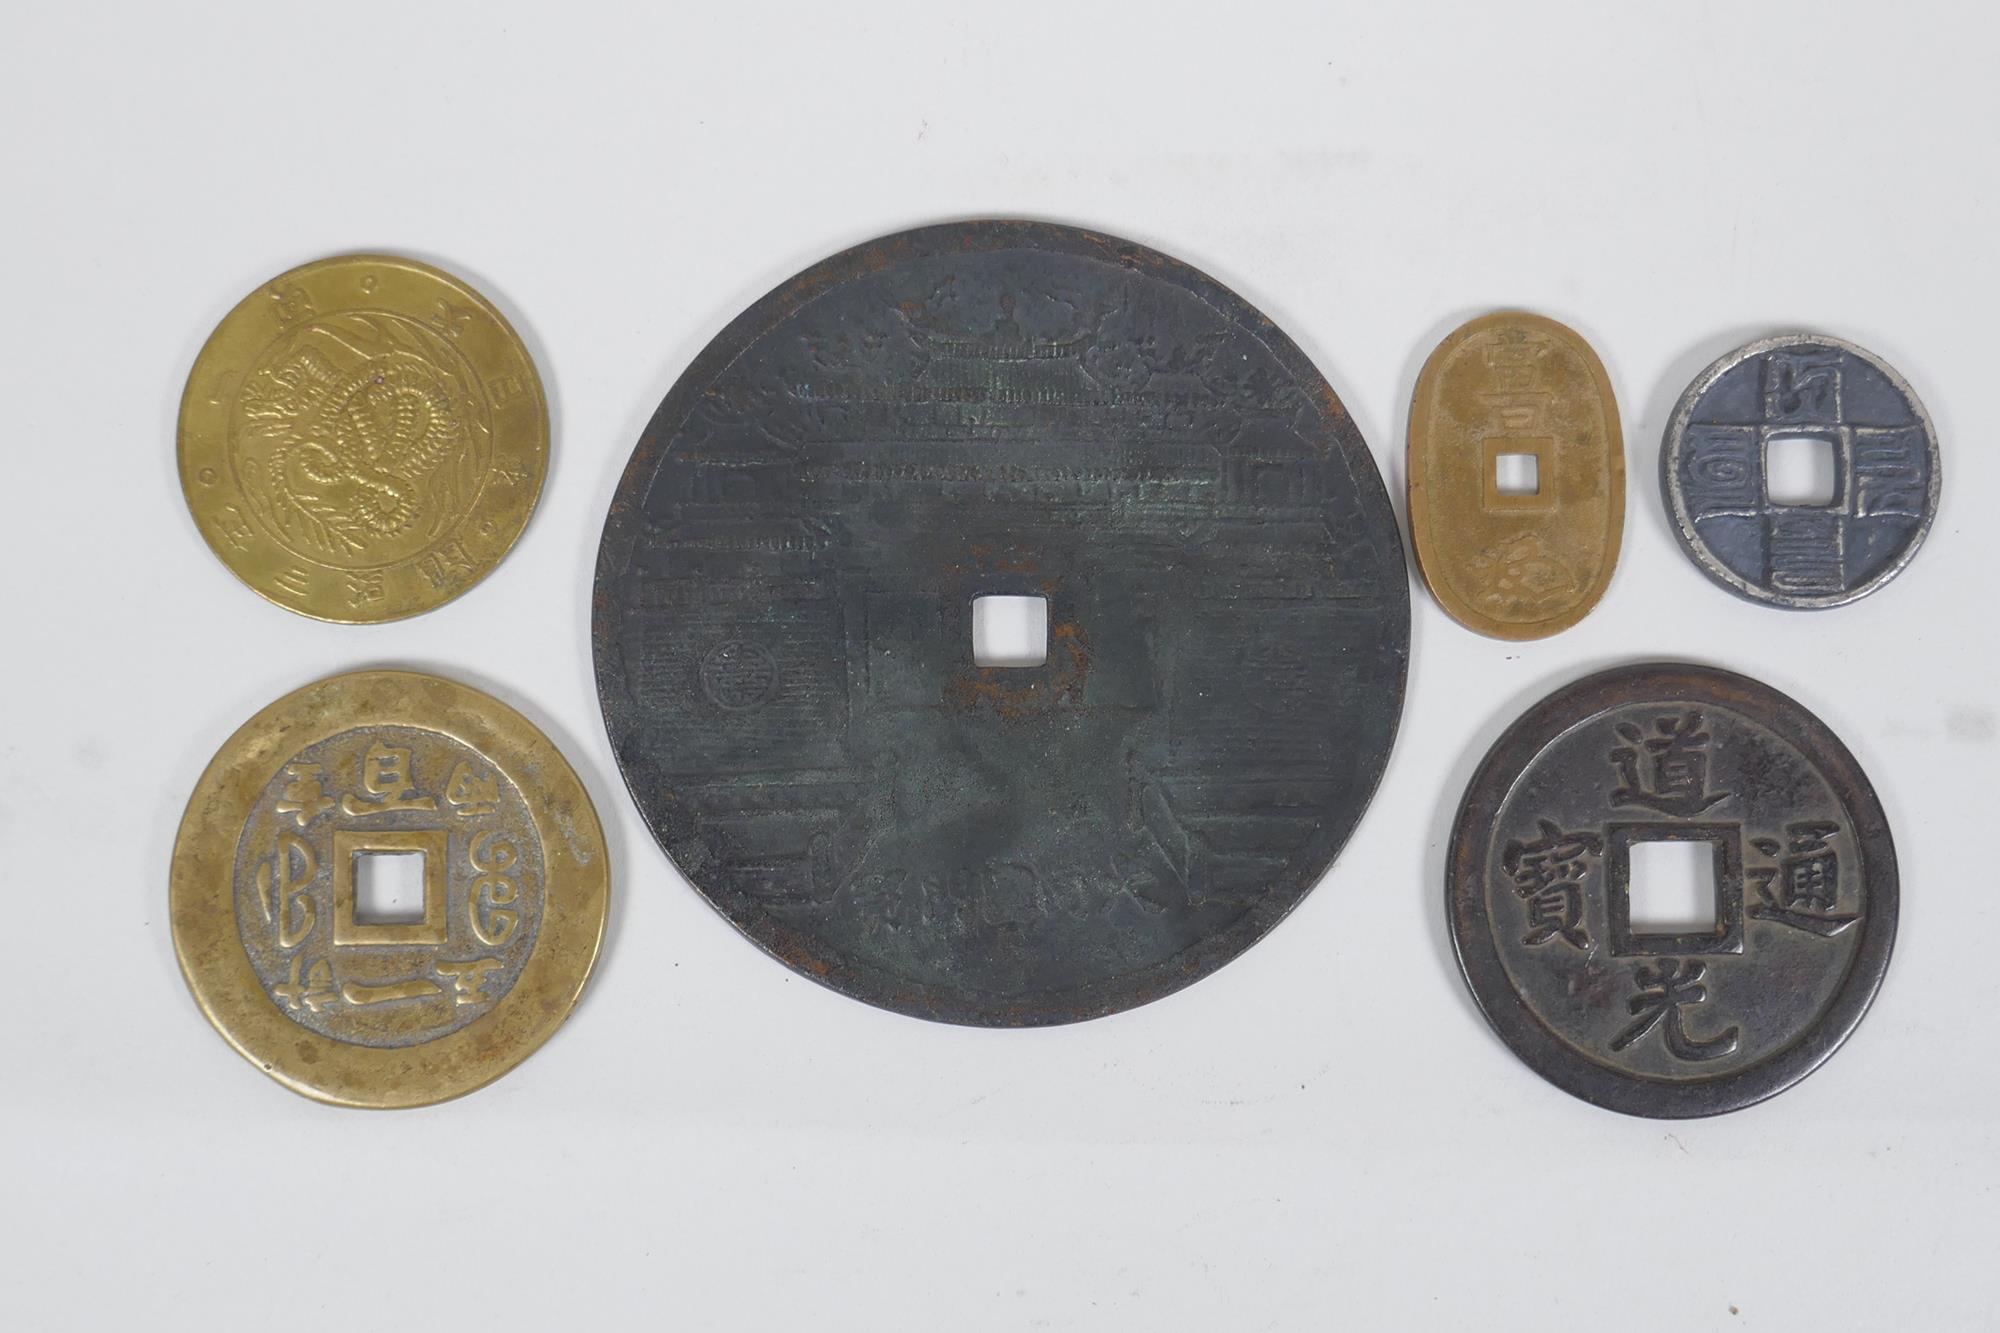 A large Chinese bronze pi-disc, and other smaller bronze pi-discs and tokens, largest 12cm diameter